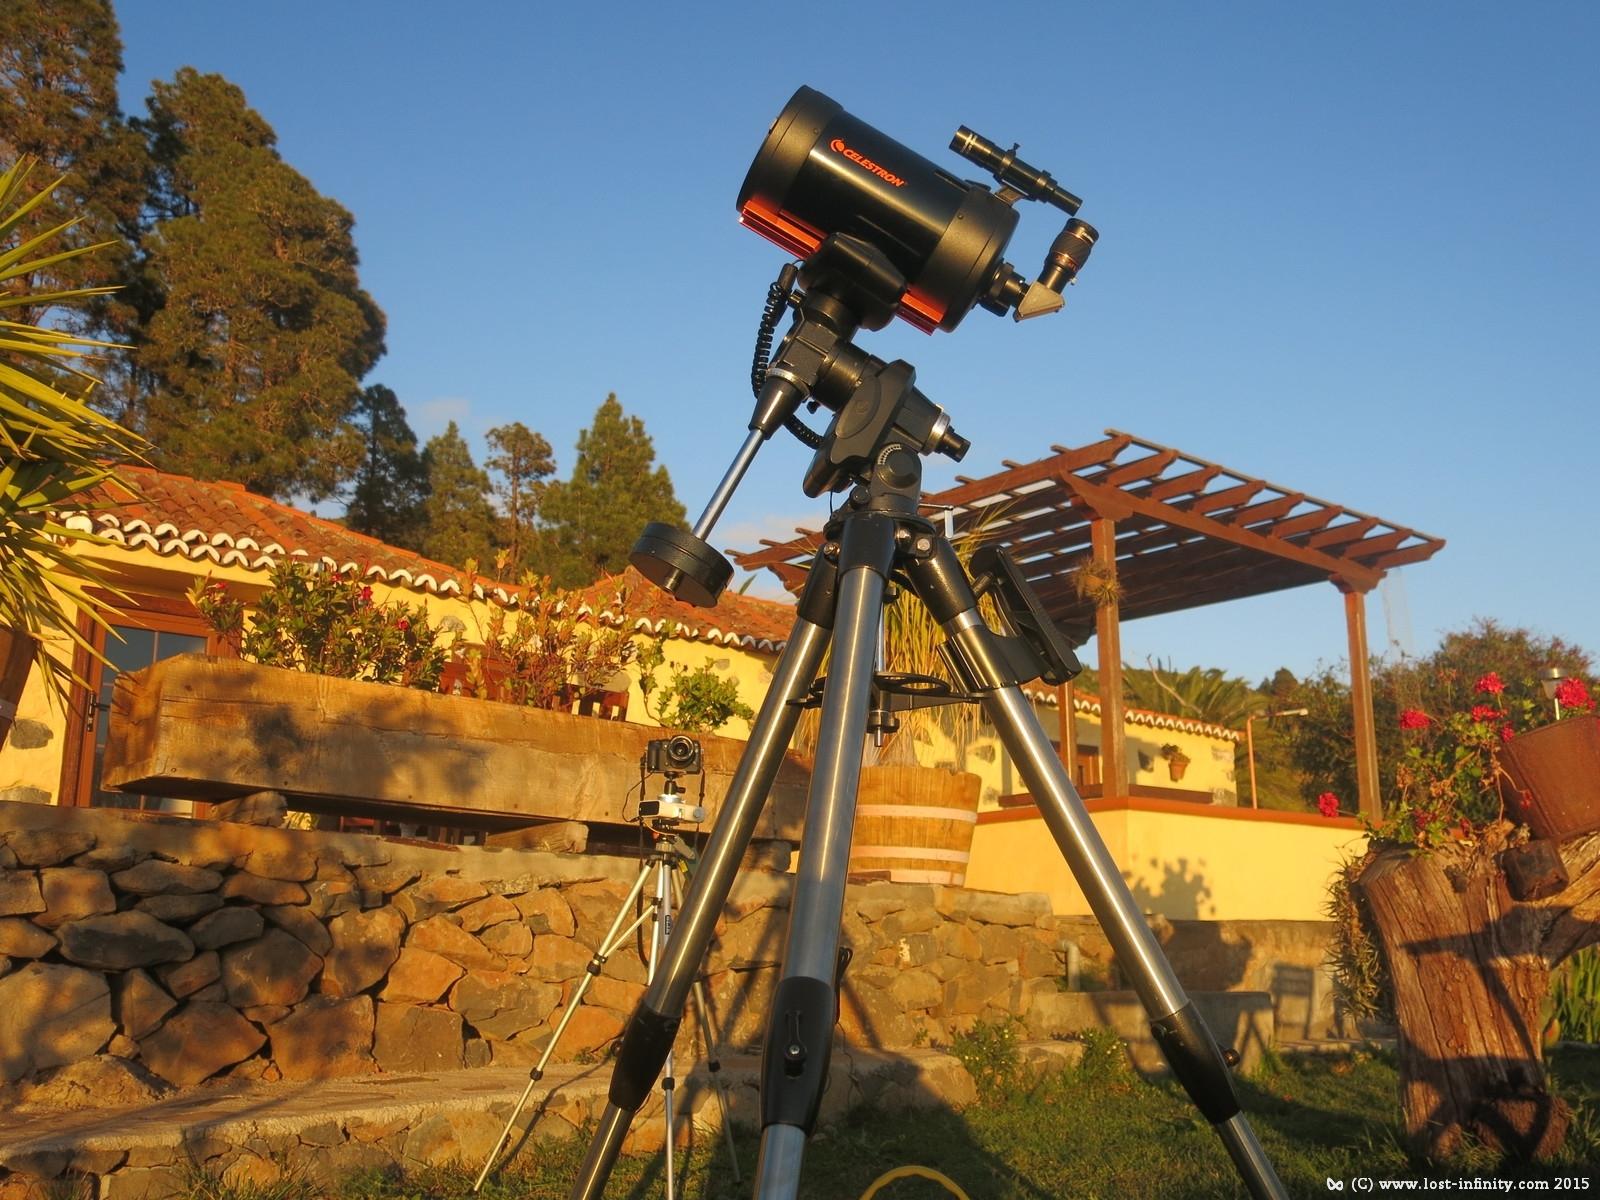 Doing some telescope tests right before sunset